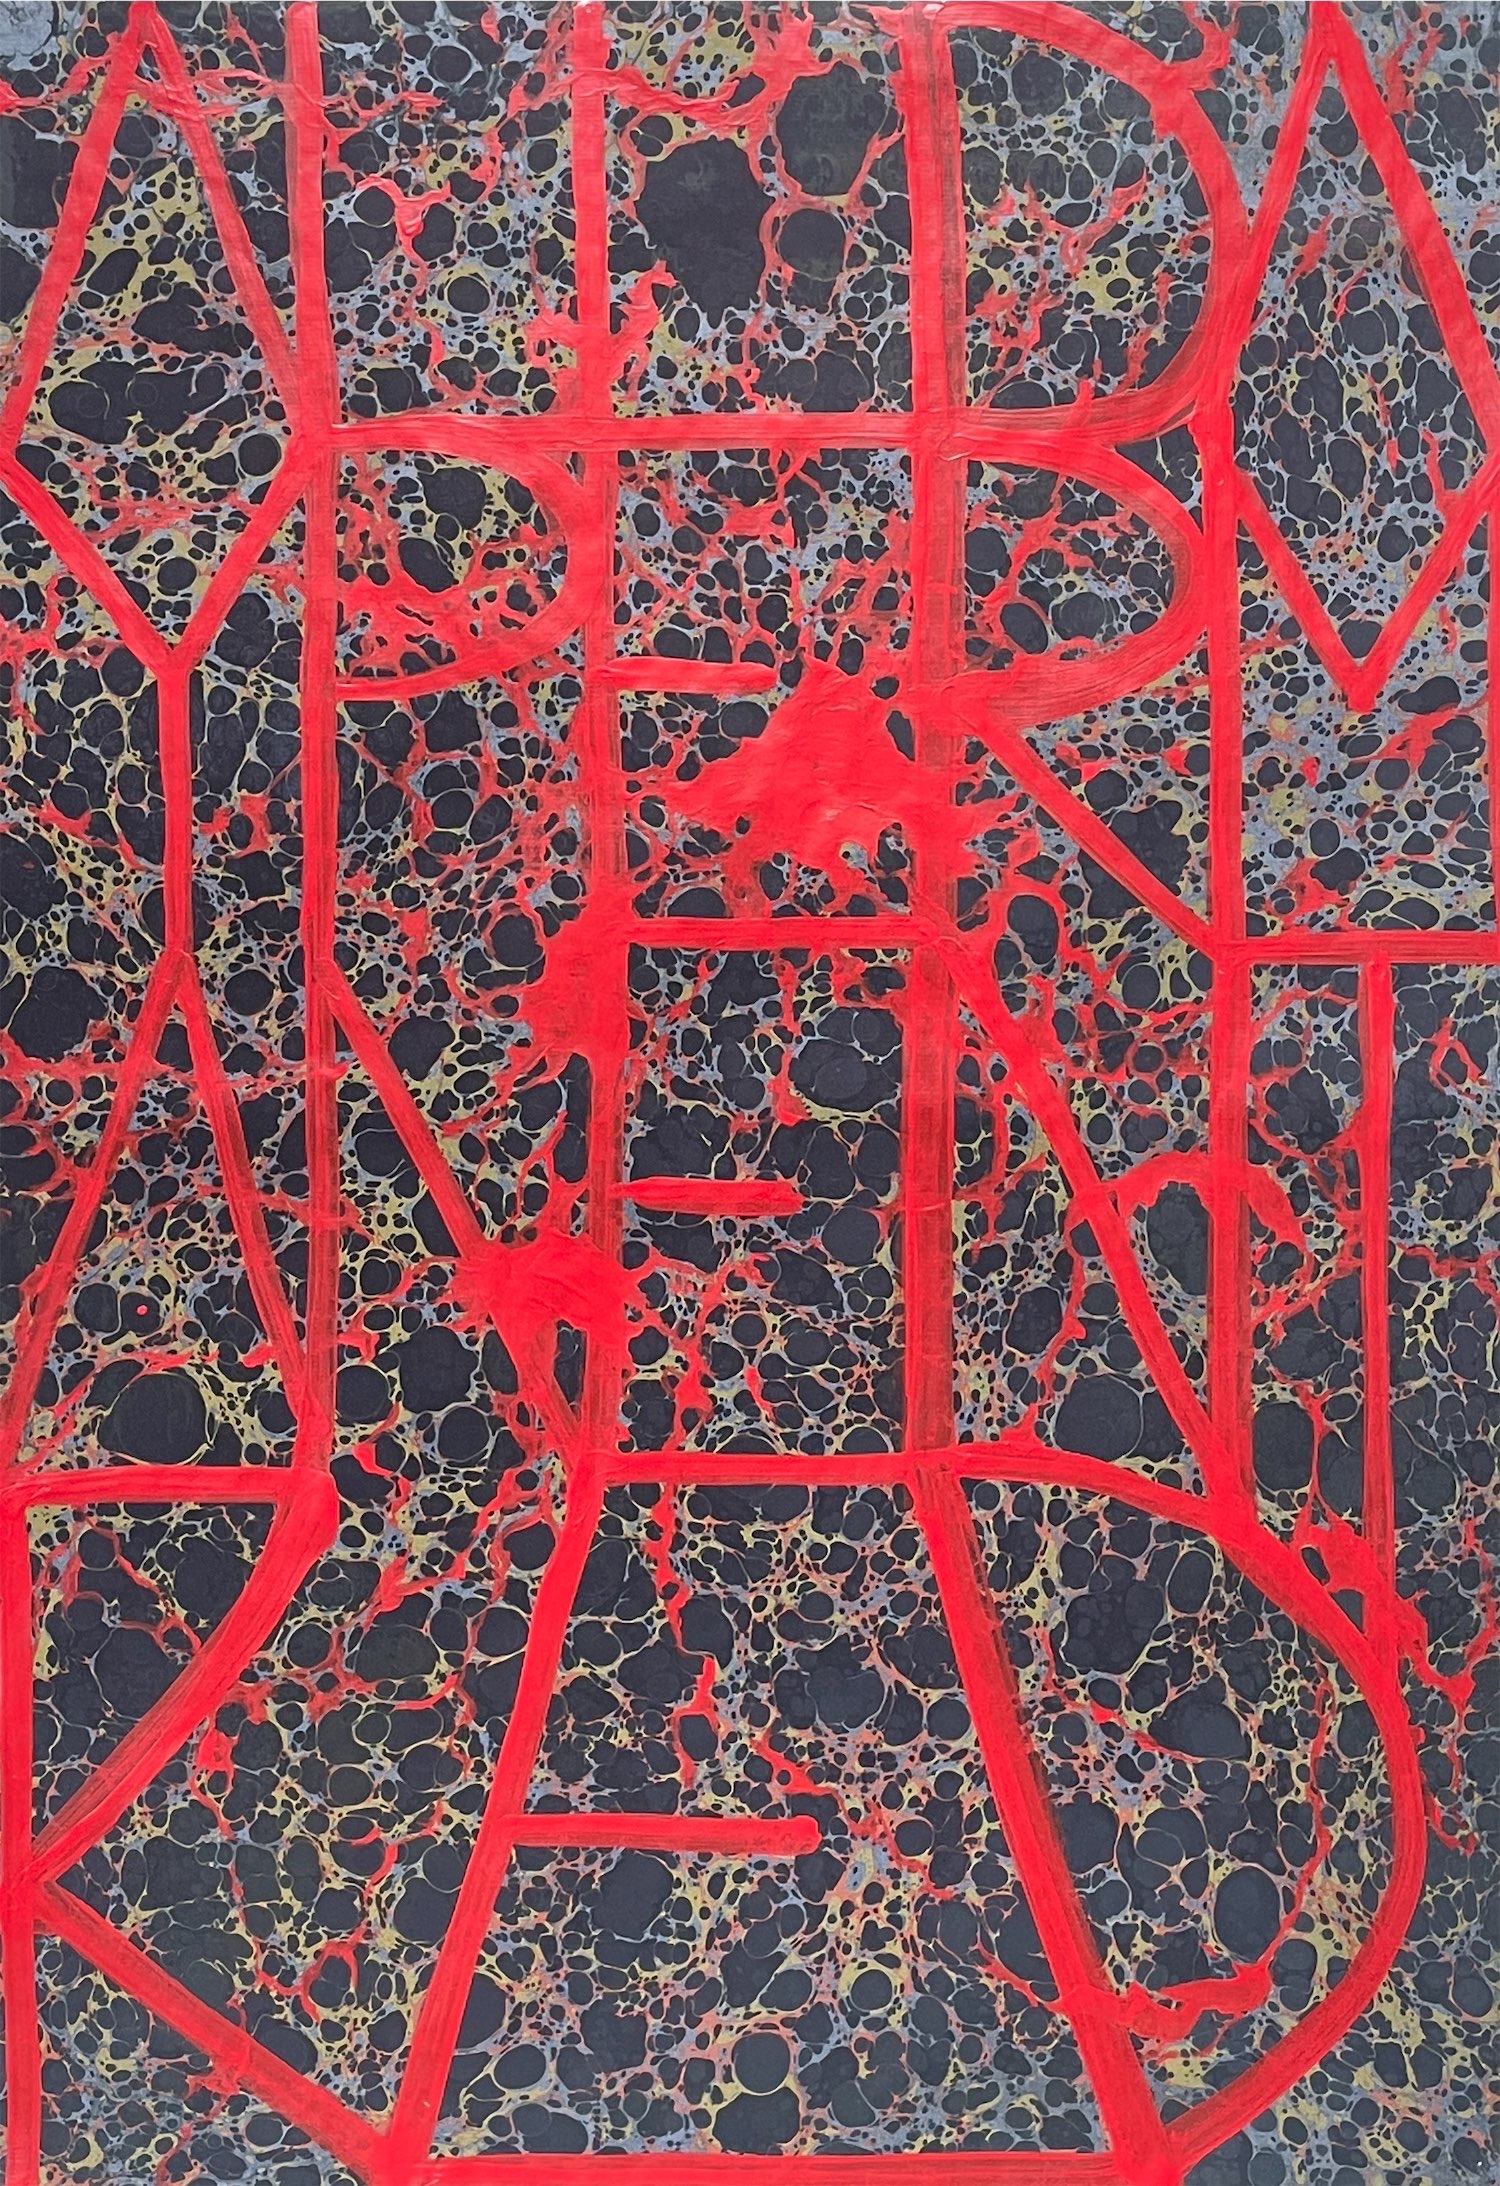 Janice McNab, The Ghost Artist — All Day Permanent Red (2022), 64x44cm, oil on acrylic on Ann Muir marbled paper